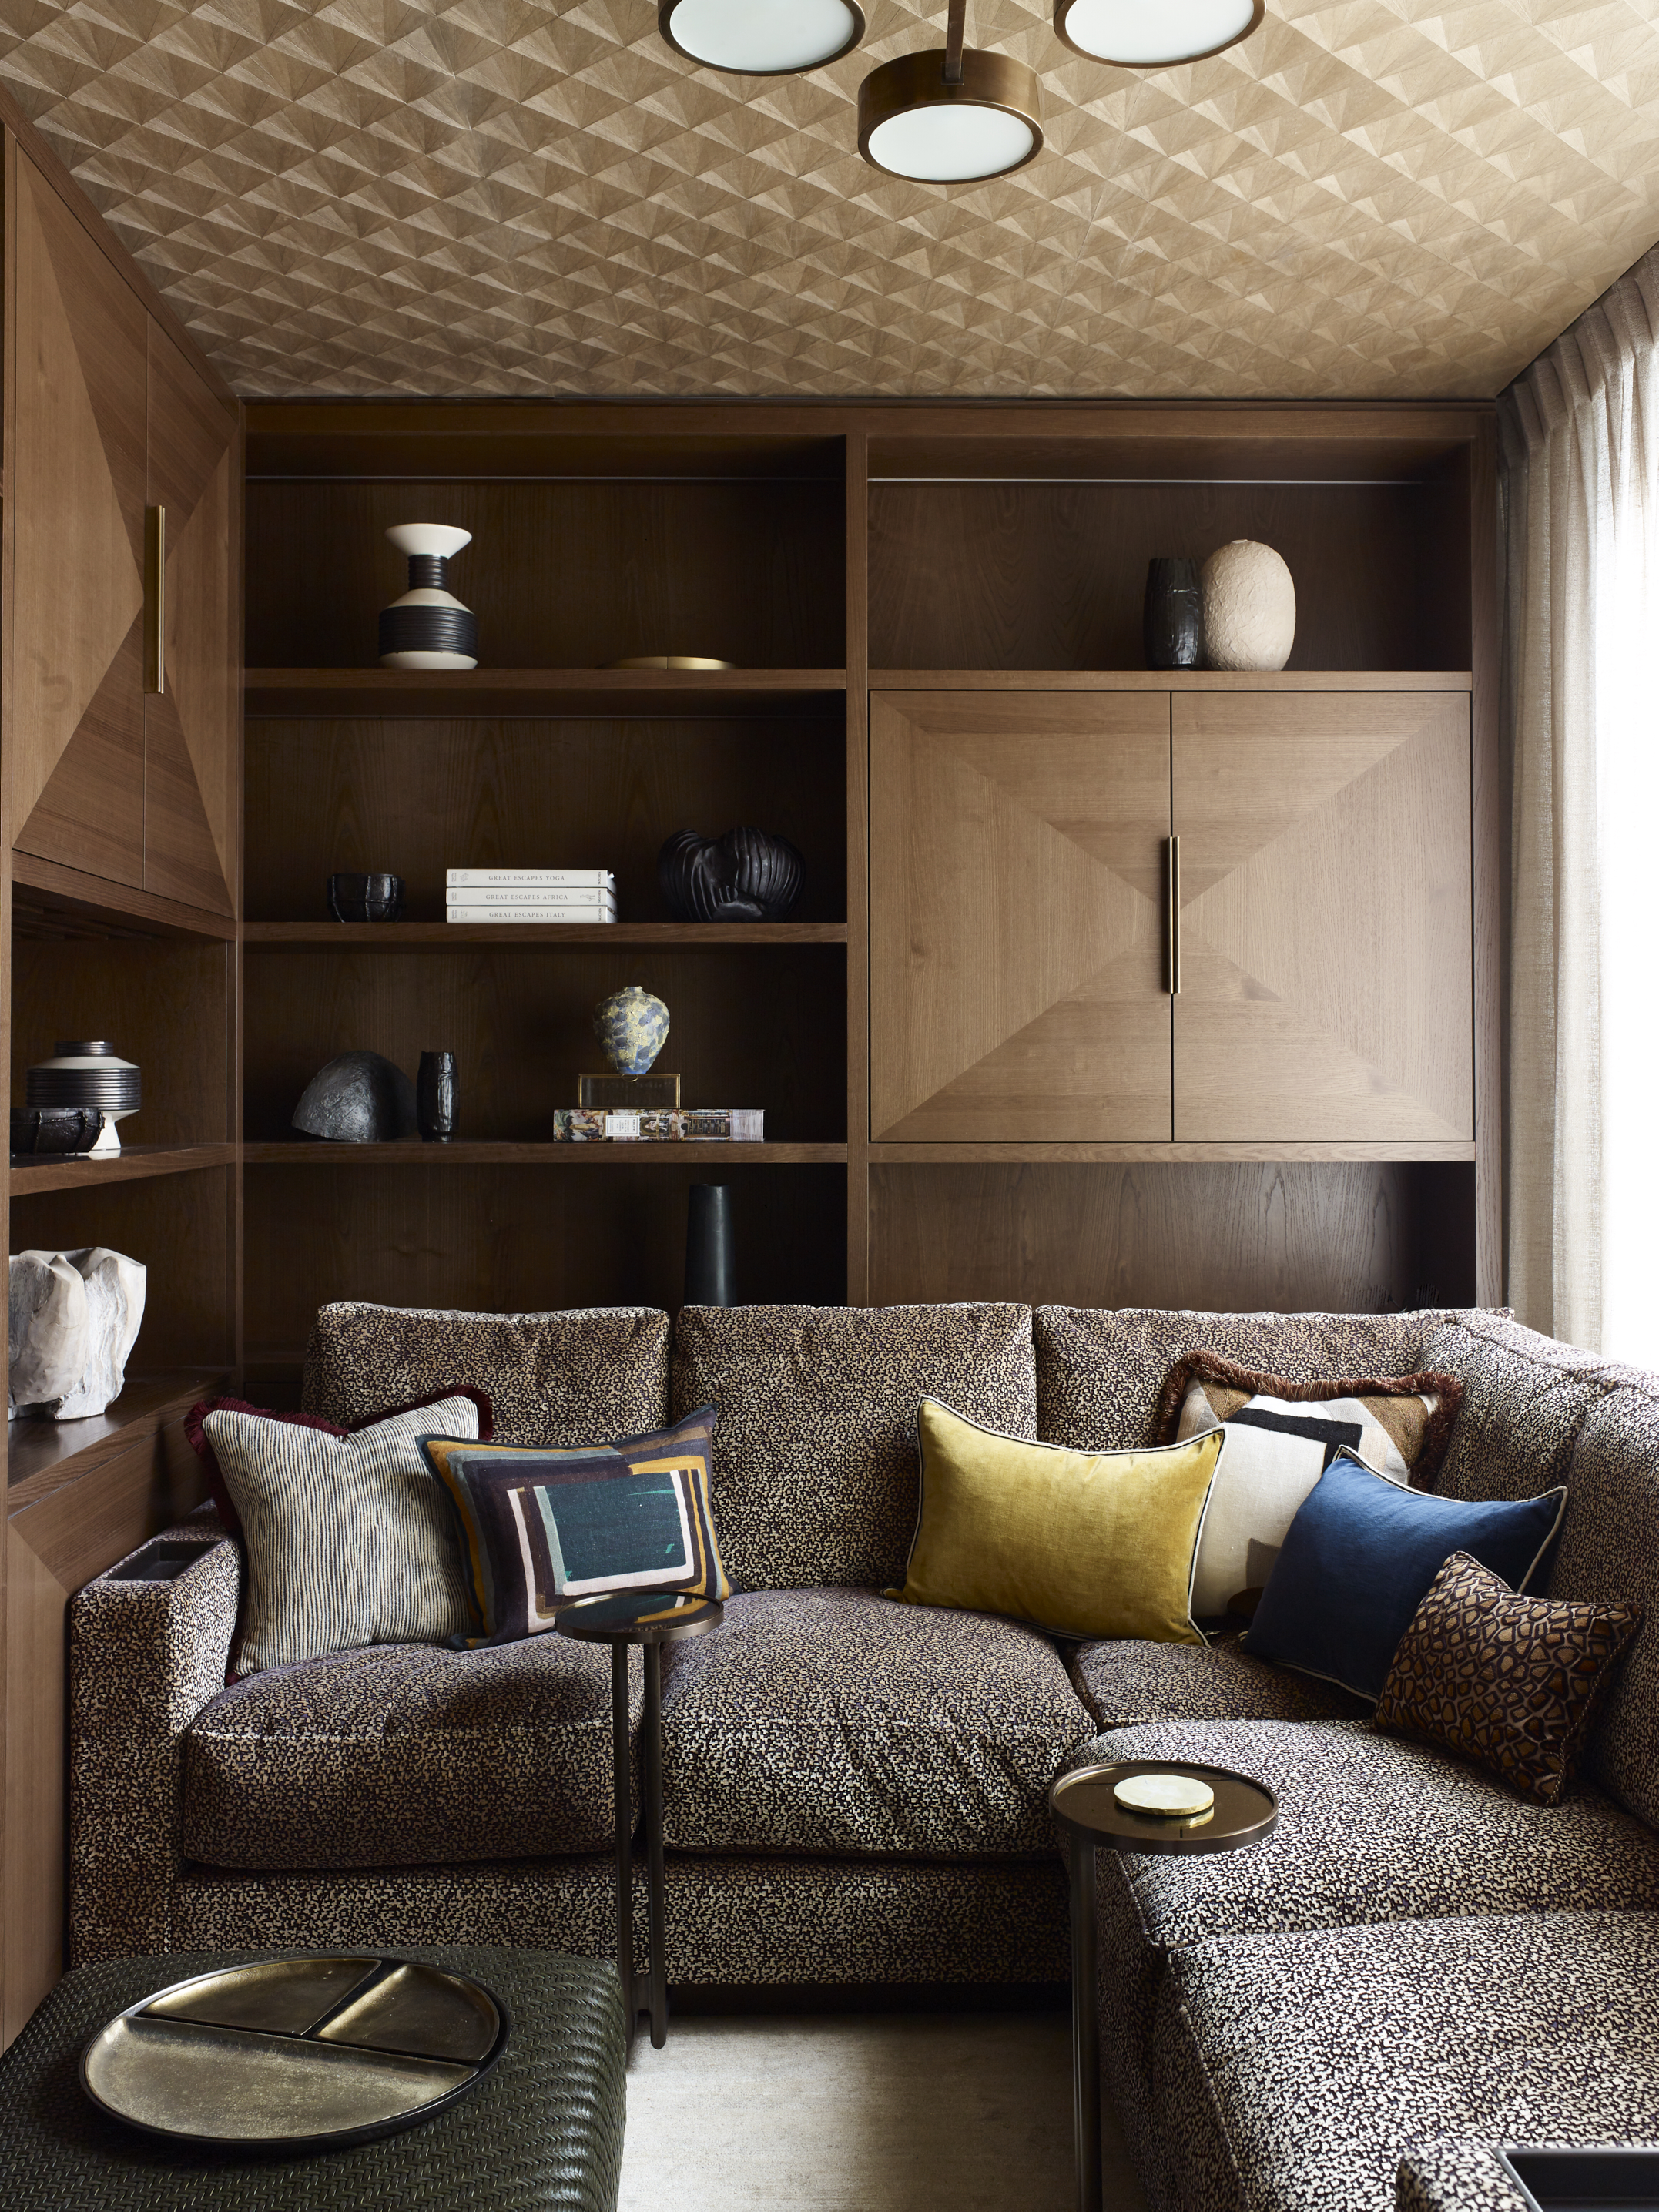 living room with wooden storage units, textured ceiling, brown couch, blue and yellow cushions, drapes, footstool